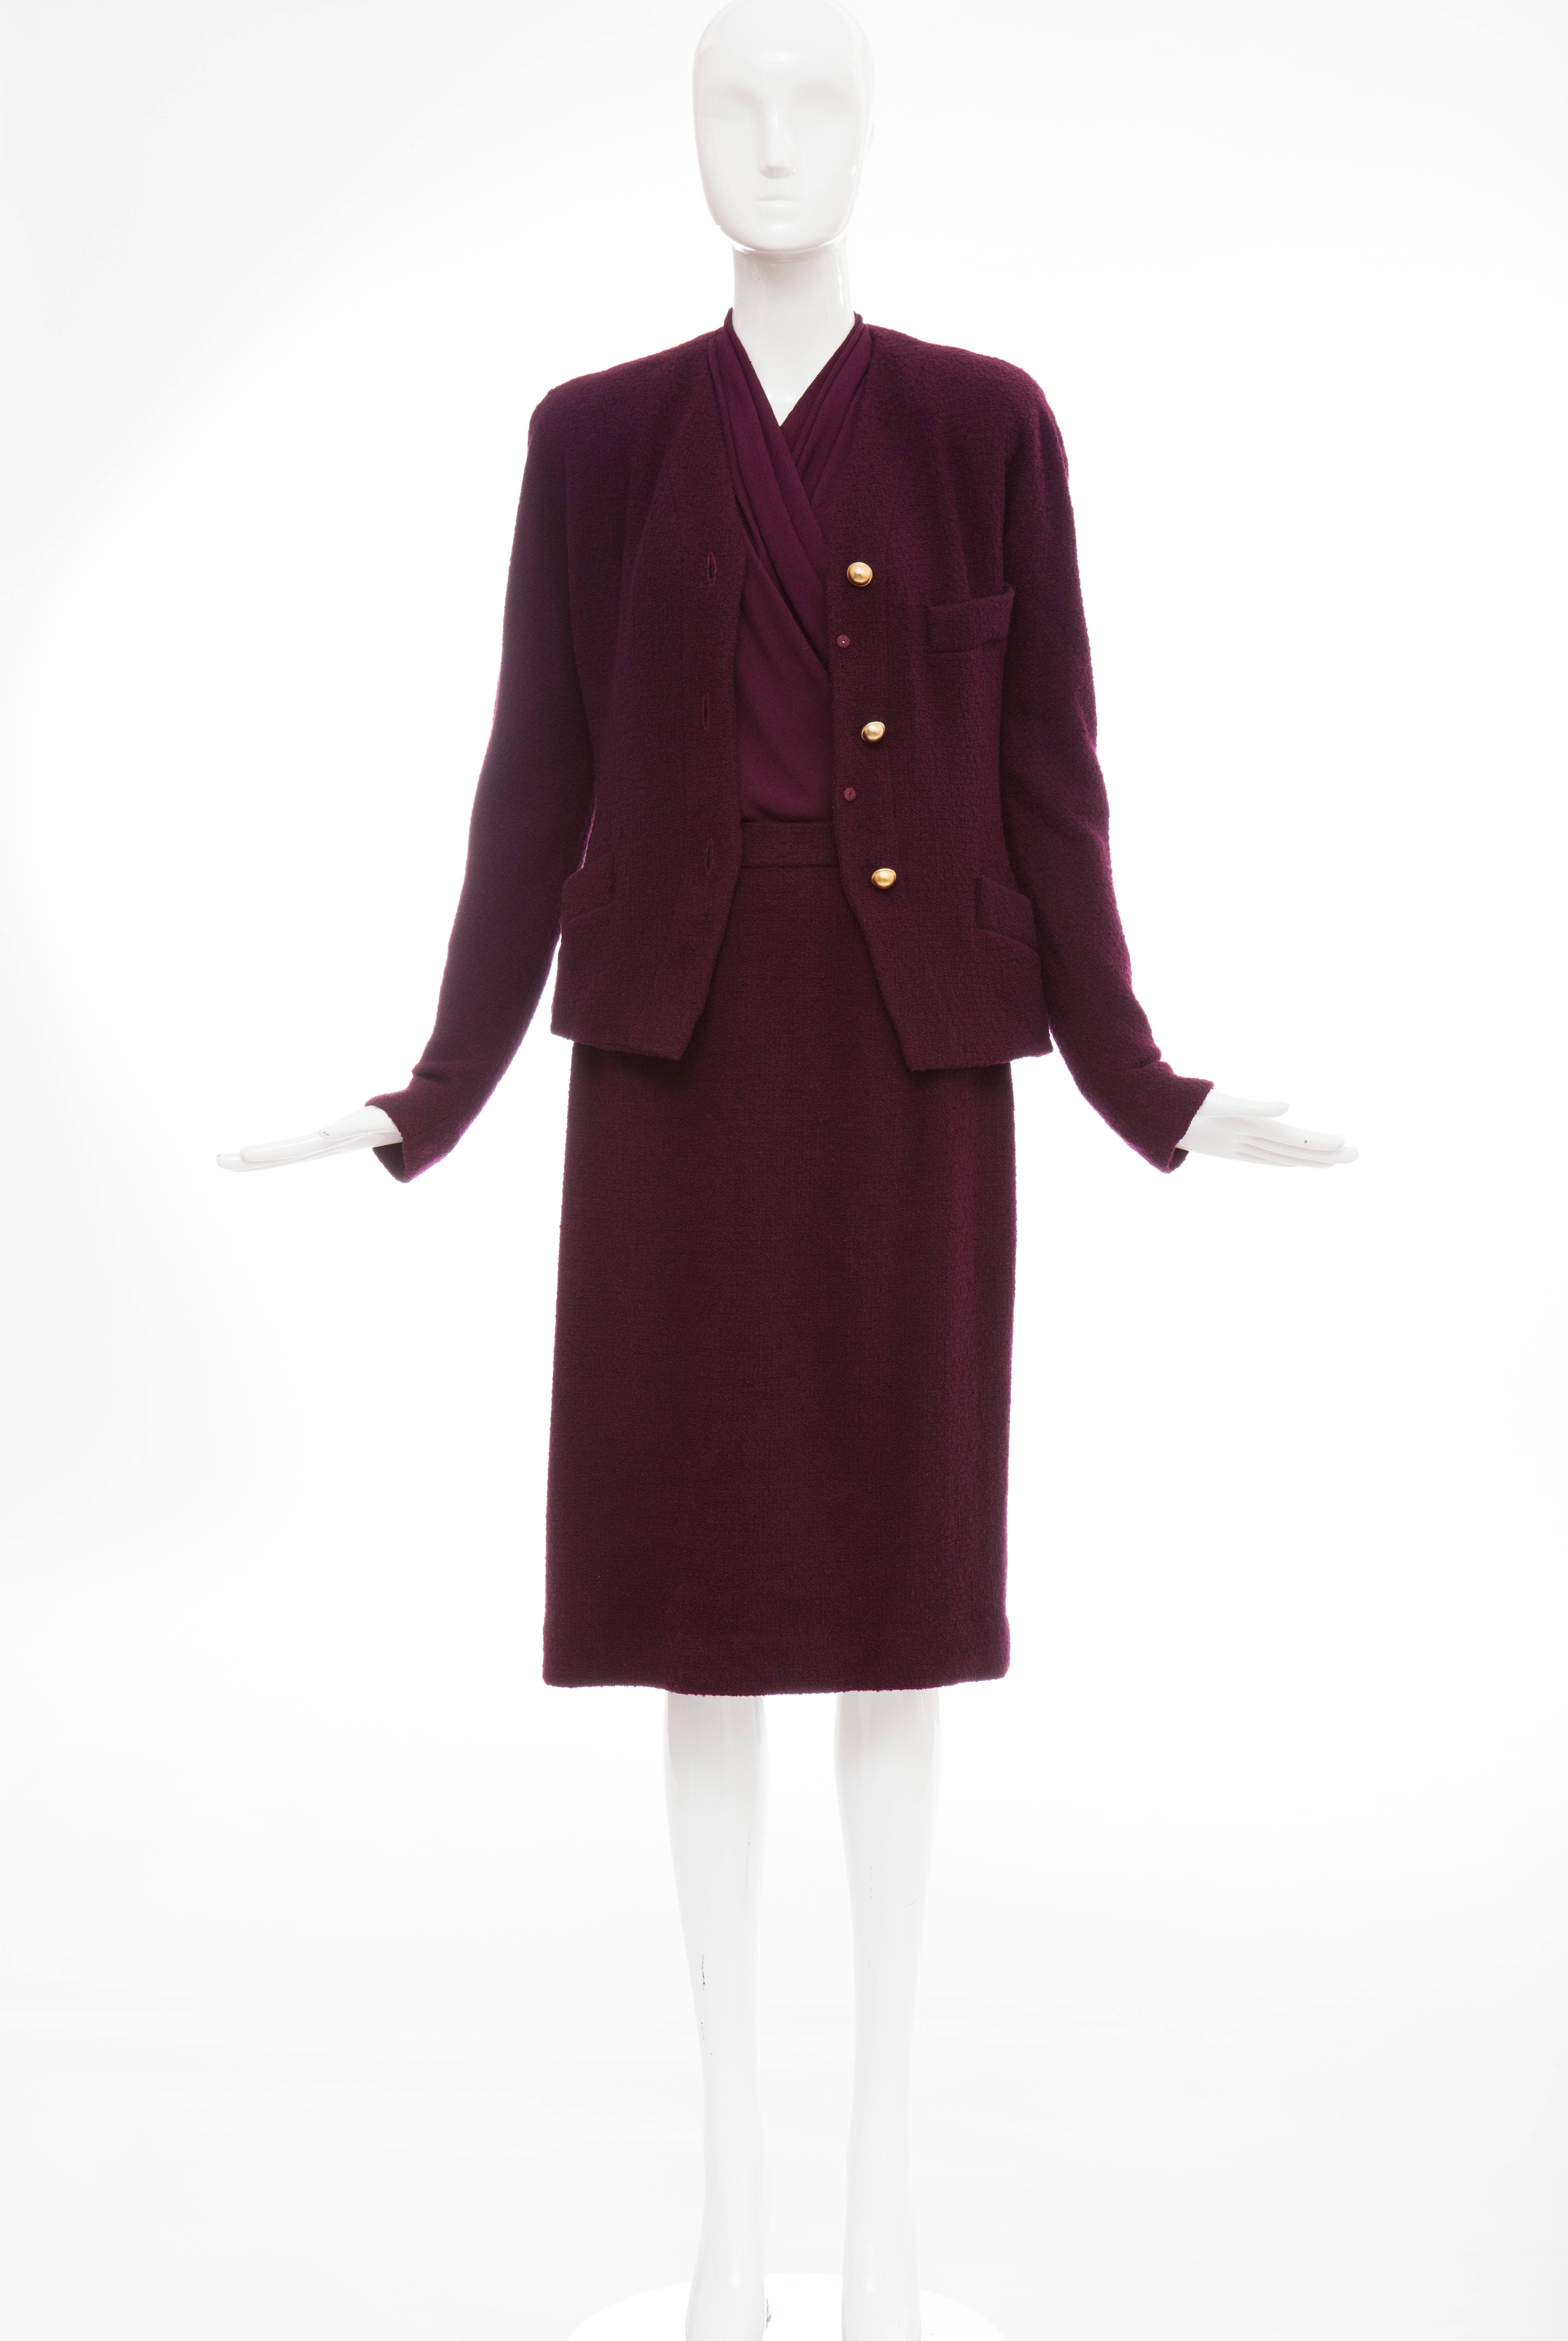 Donna Karan, circa 1980's eggplant stretch wool nylon knit three piece skirt suit, button front and snap jacket with two front pockets, bodysuit with back zip, skirt with back zip and fully lined. 


Jacket: US. 12  Bust 38, Waist 31, Length